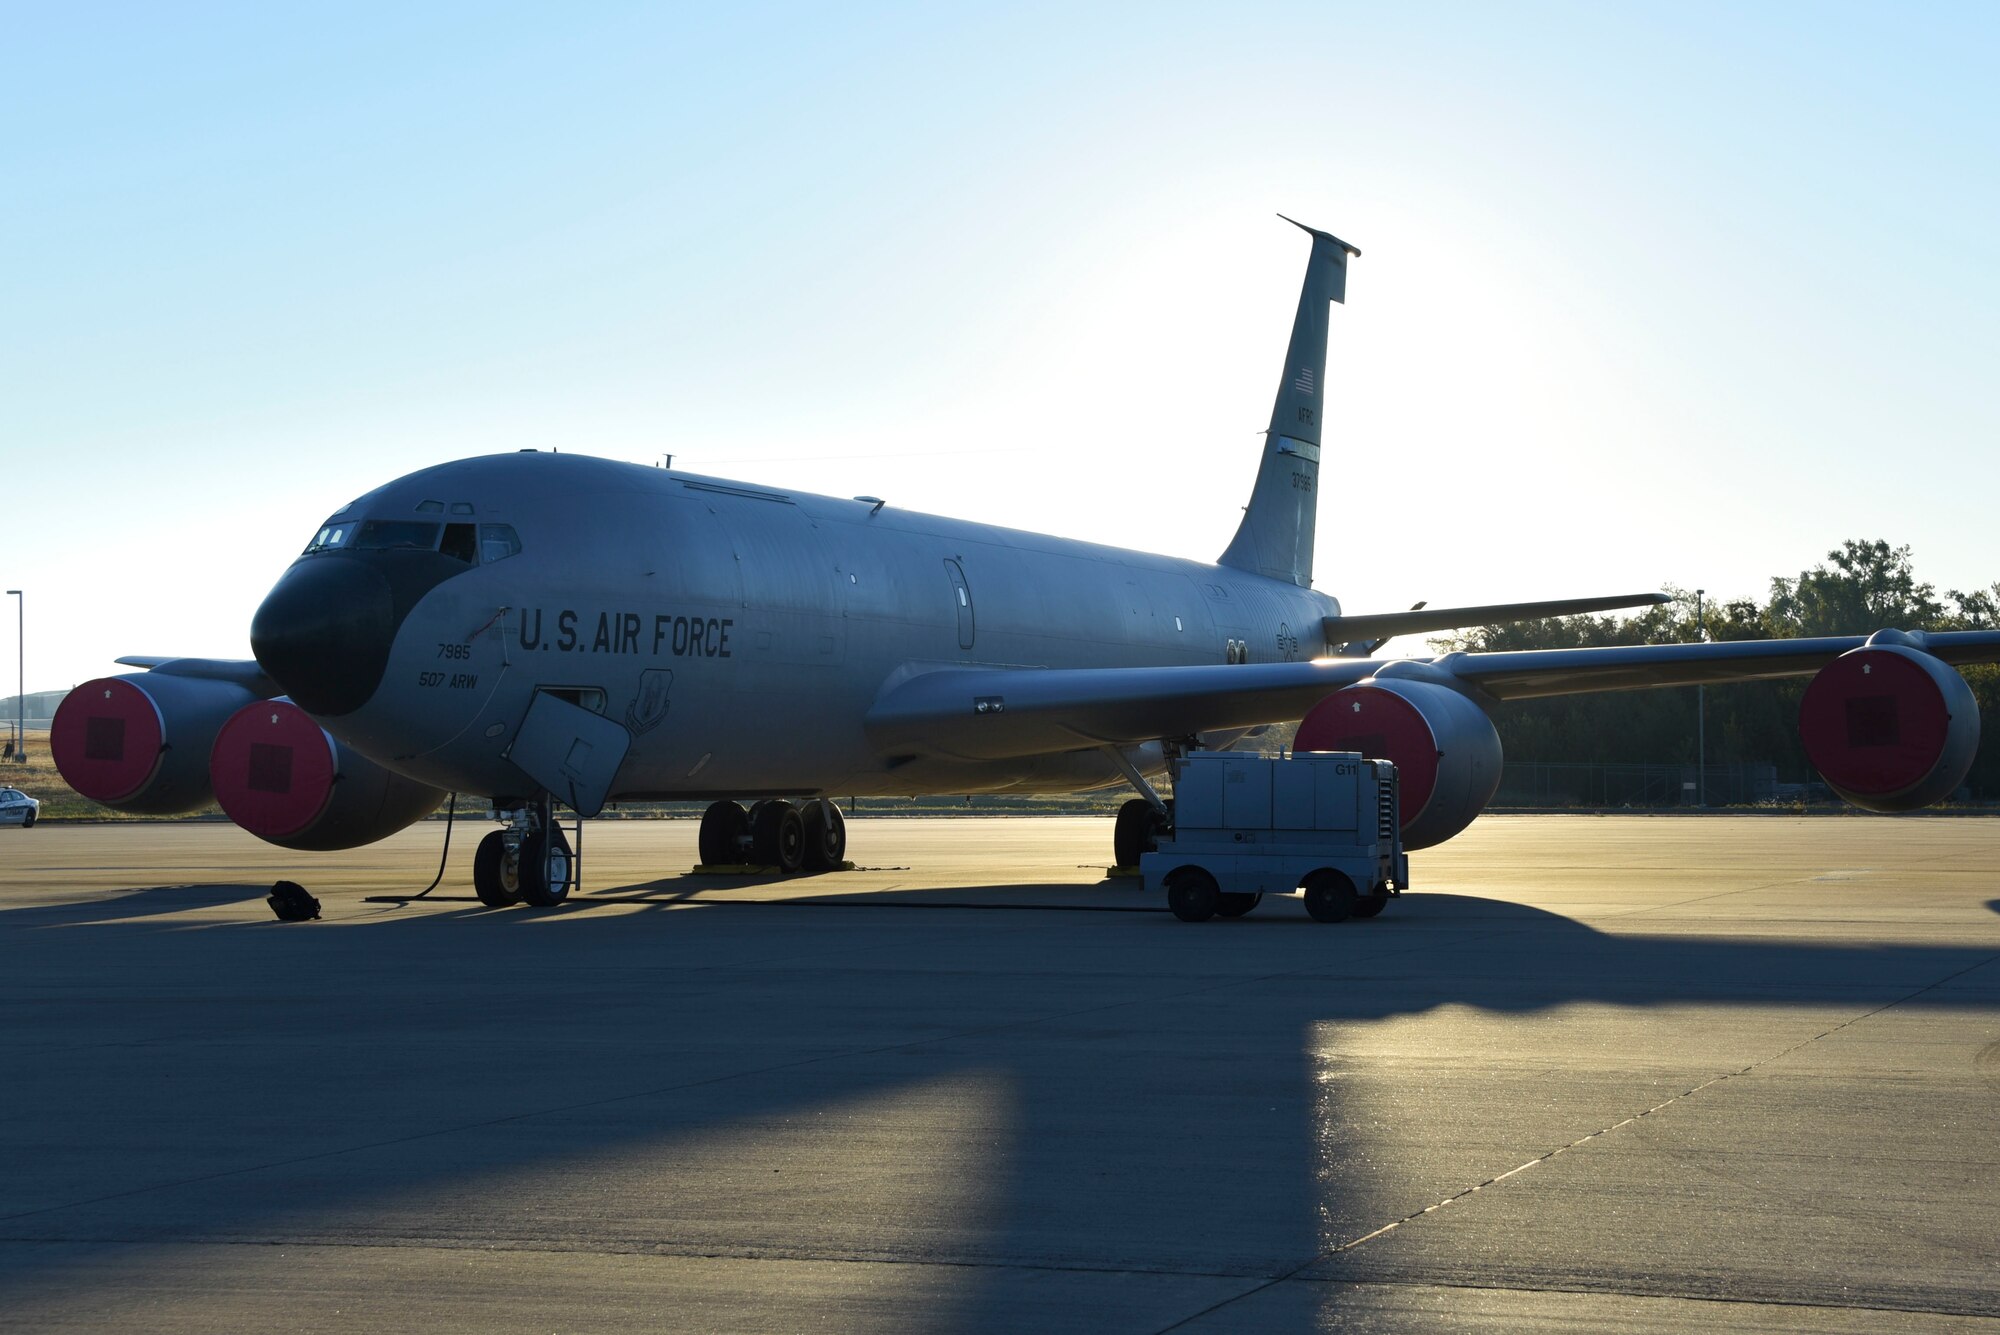 A KC-135 Stratotanker sits on the ramp being inspected during the Global Thunder exercise, Nov. 7, 2021, on Tinker Air Force Base, Oklahoma. Global Thunder is a is a U.S. Strategic Command annual nuclear command and control and field training exercise. (U.S. Air Force photo by Staff Sgt. Jasmine Czajka)